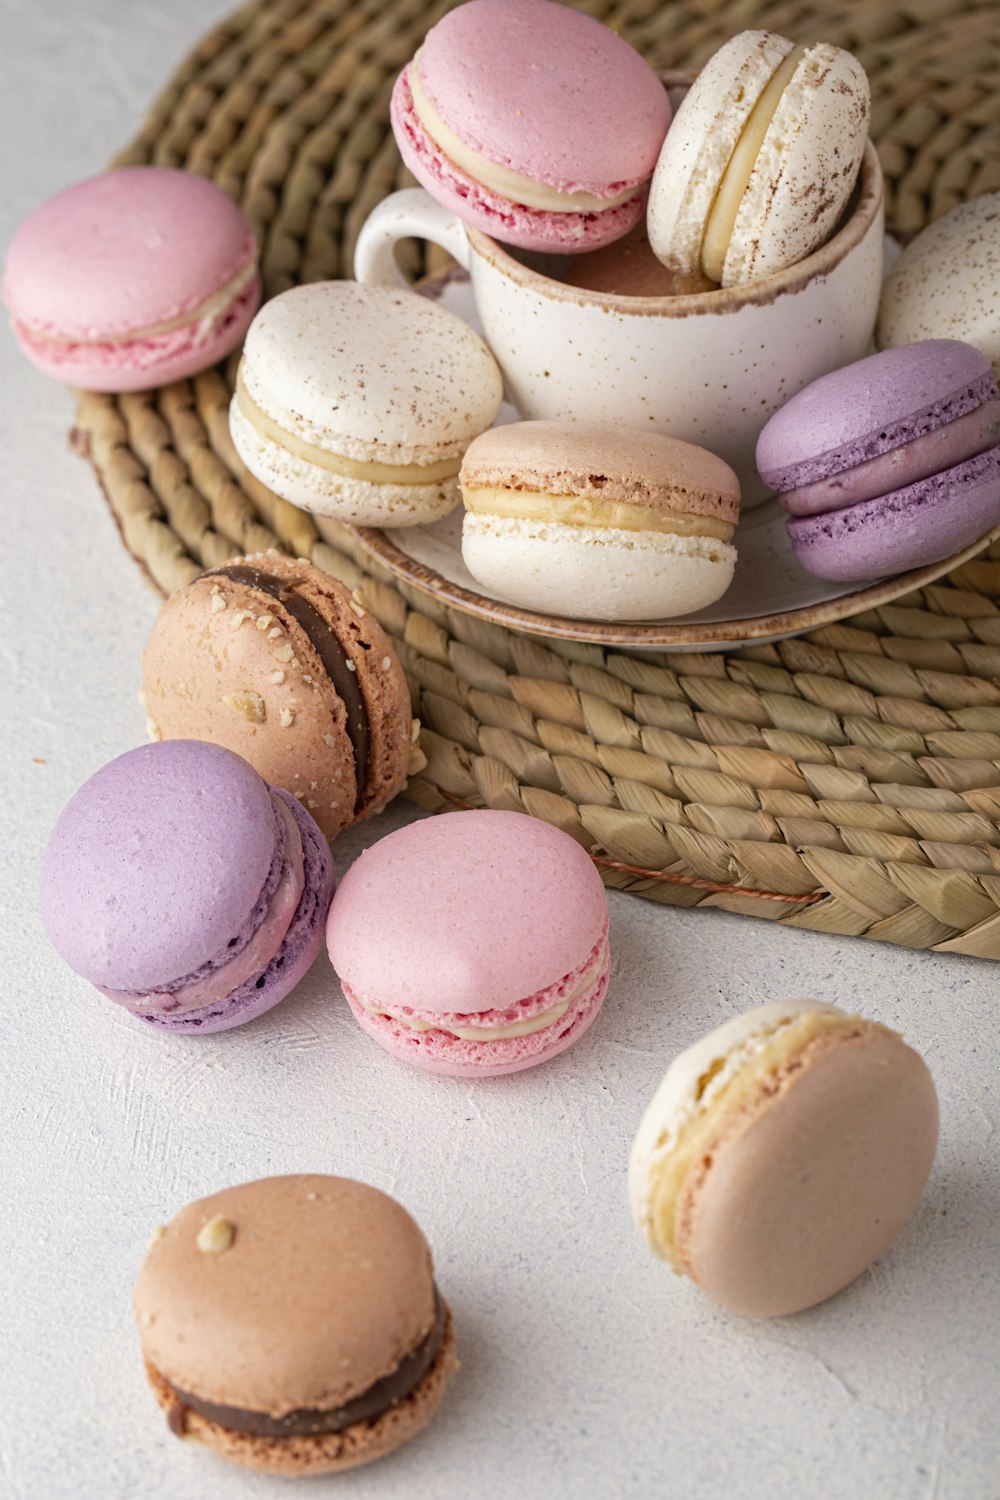 a wicker basket filled with macaroons and a cup of tea